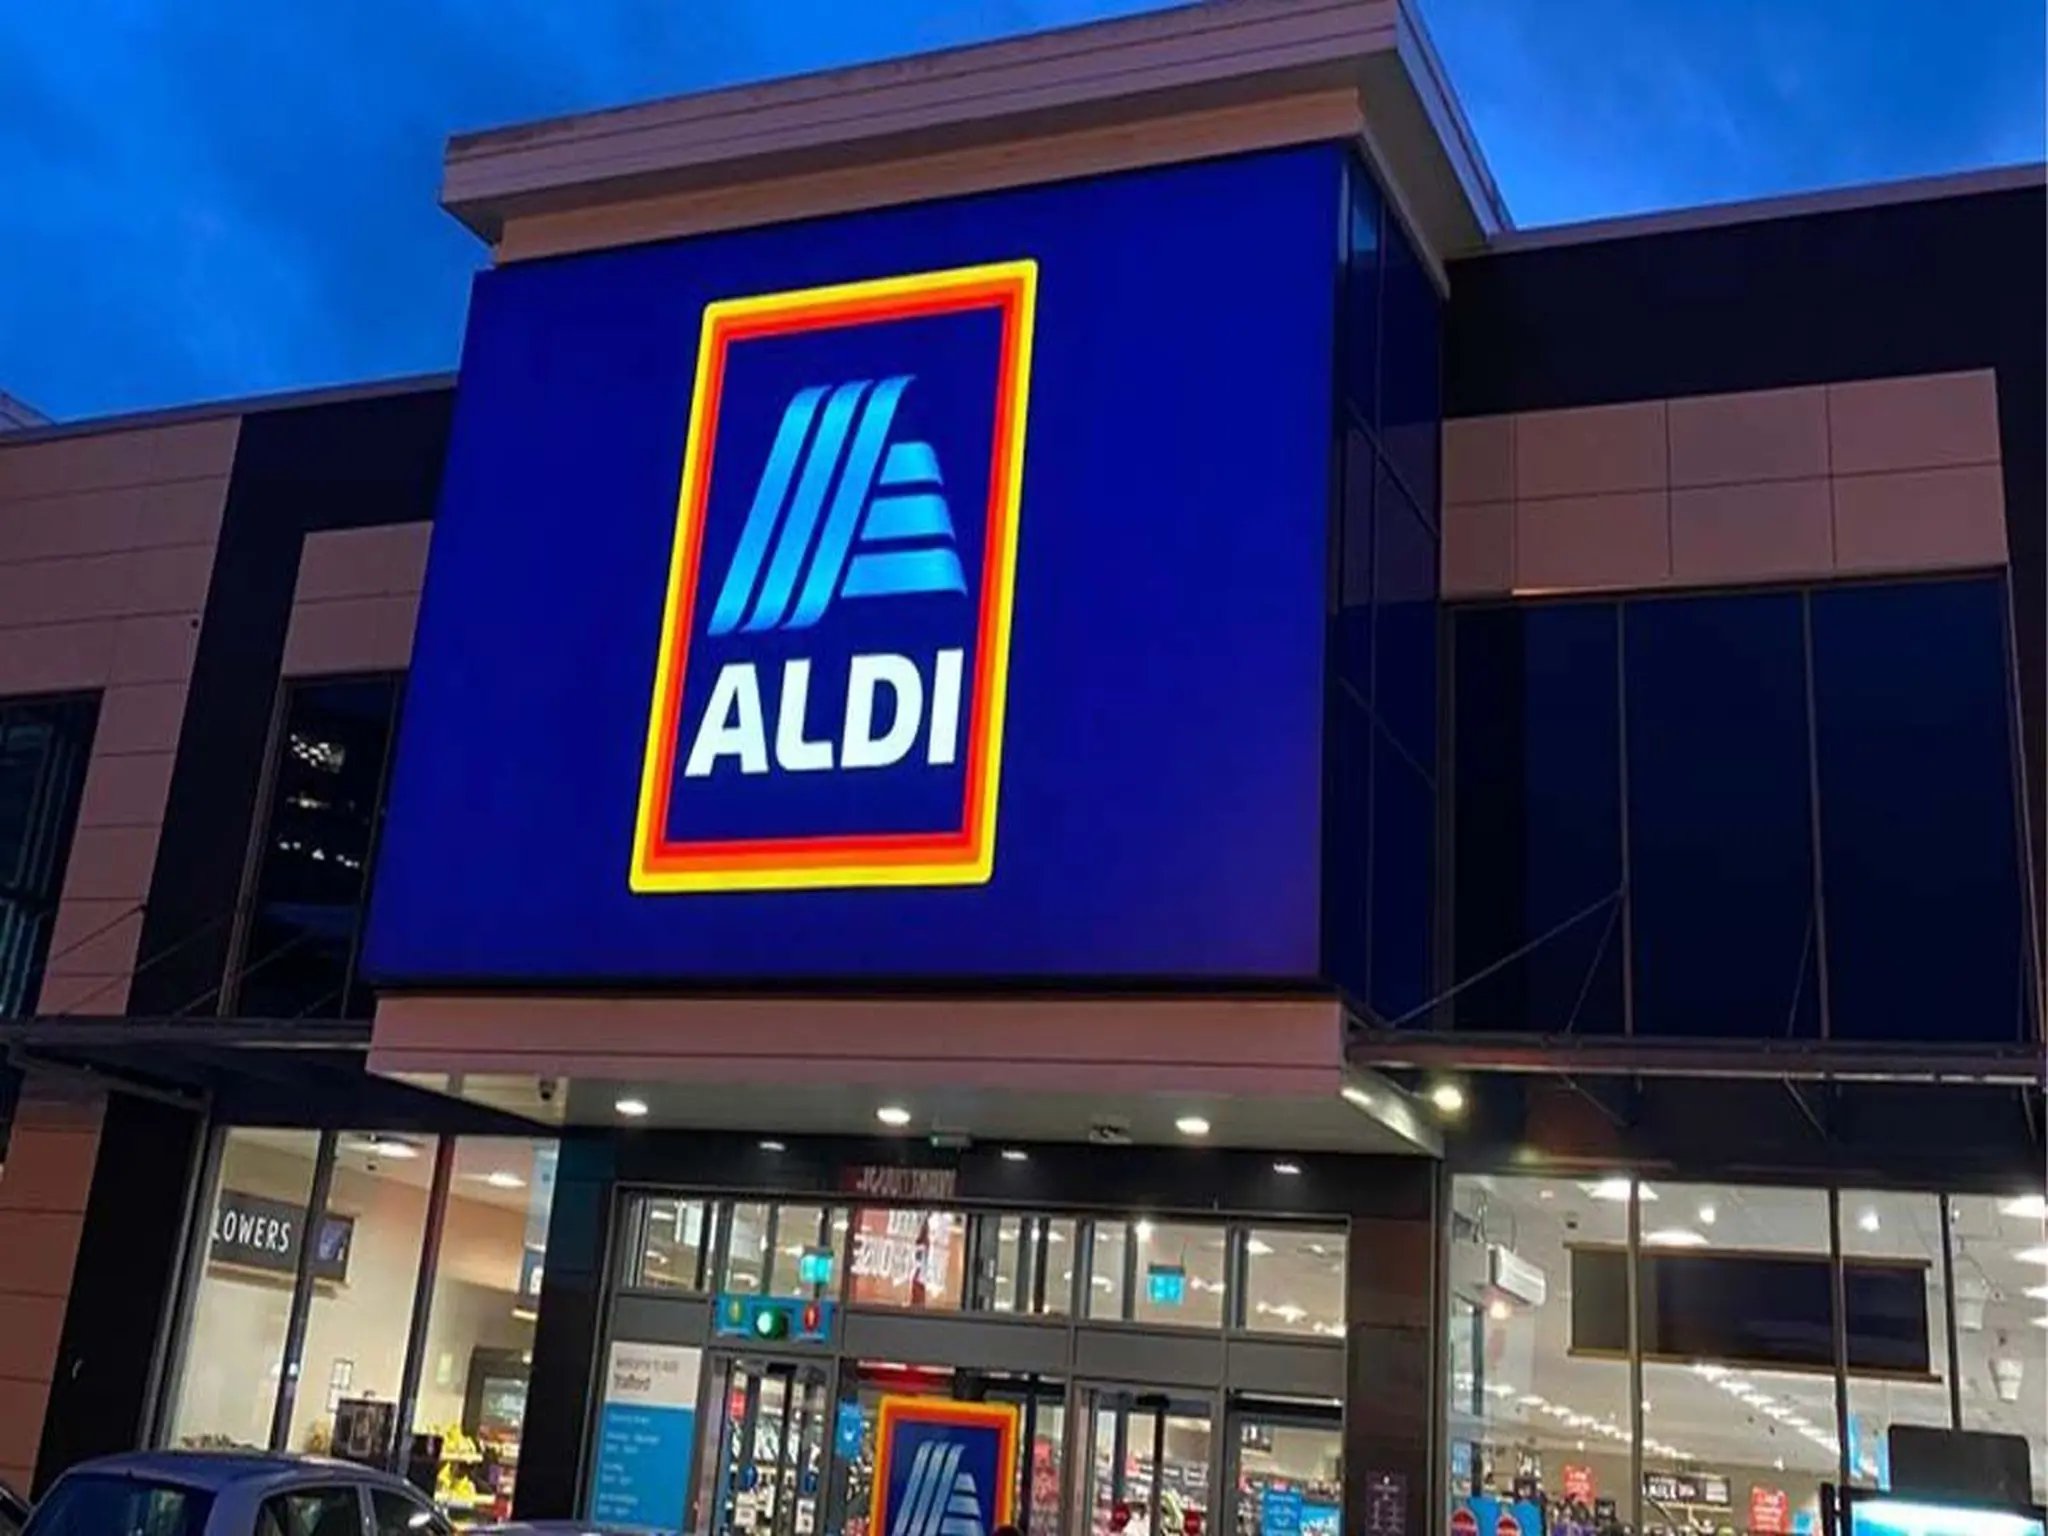 Aldi UK and Lidl GB have announced their highest-ever Christmas sales figures